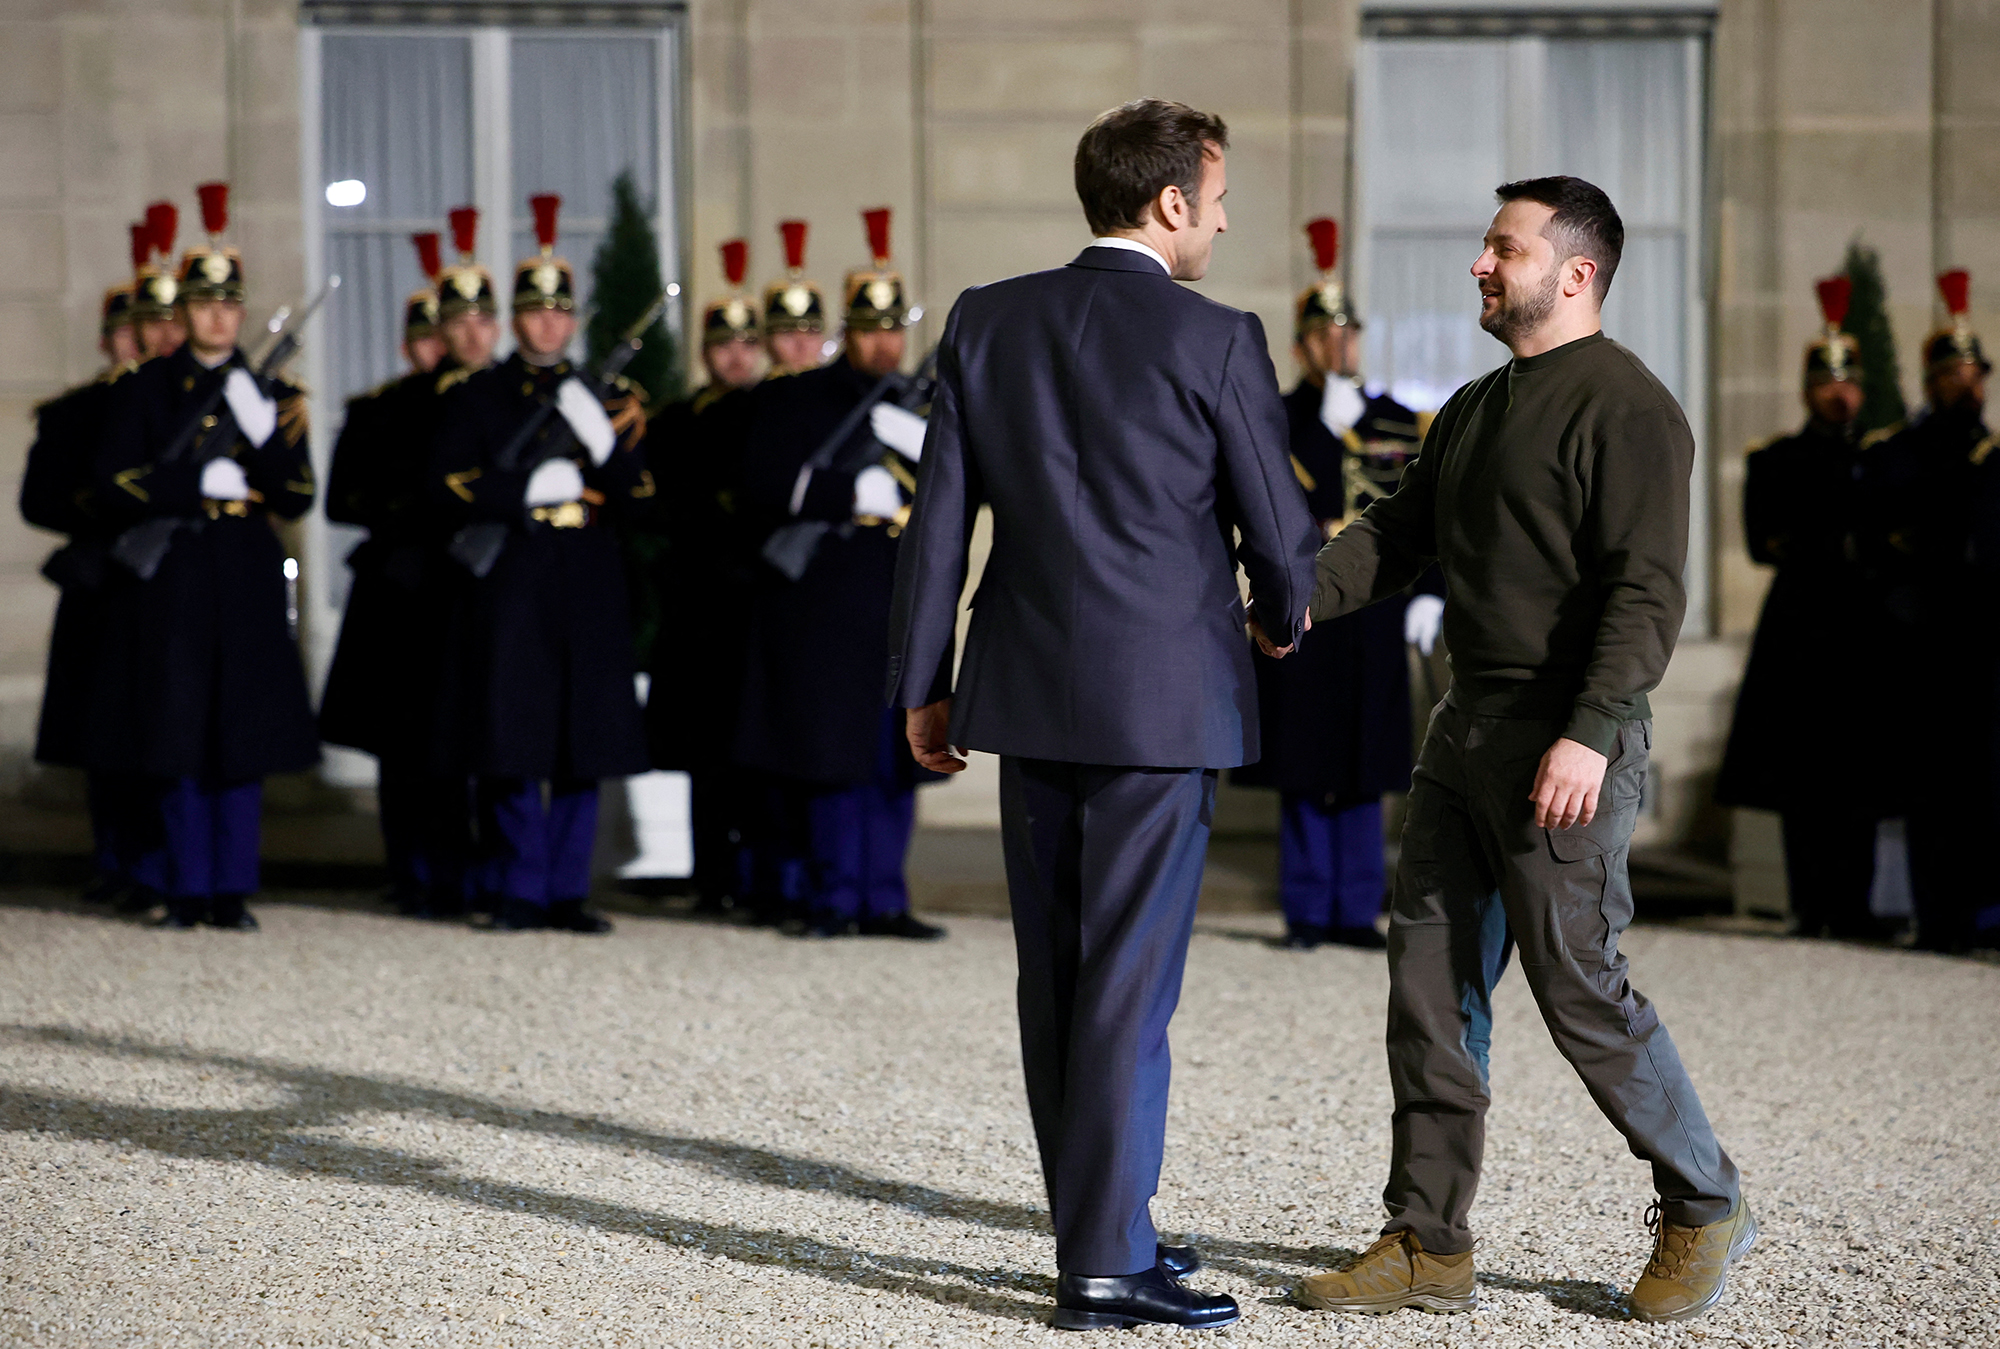 French President Emmanuel Macron welcomes Zelensky for a meeting at the Elysee Palace in Paris, France, on February 8.